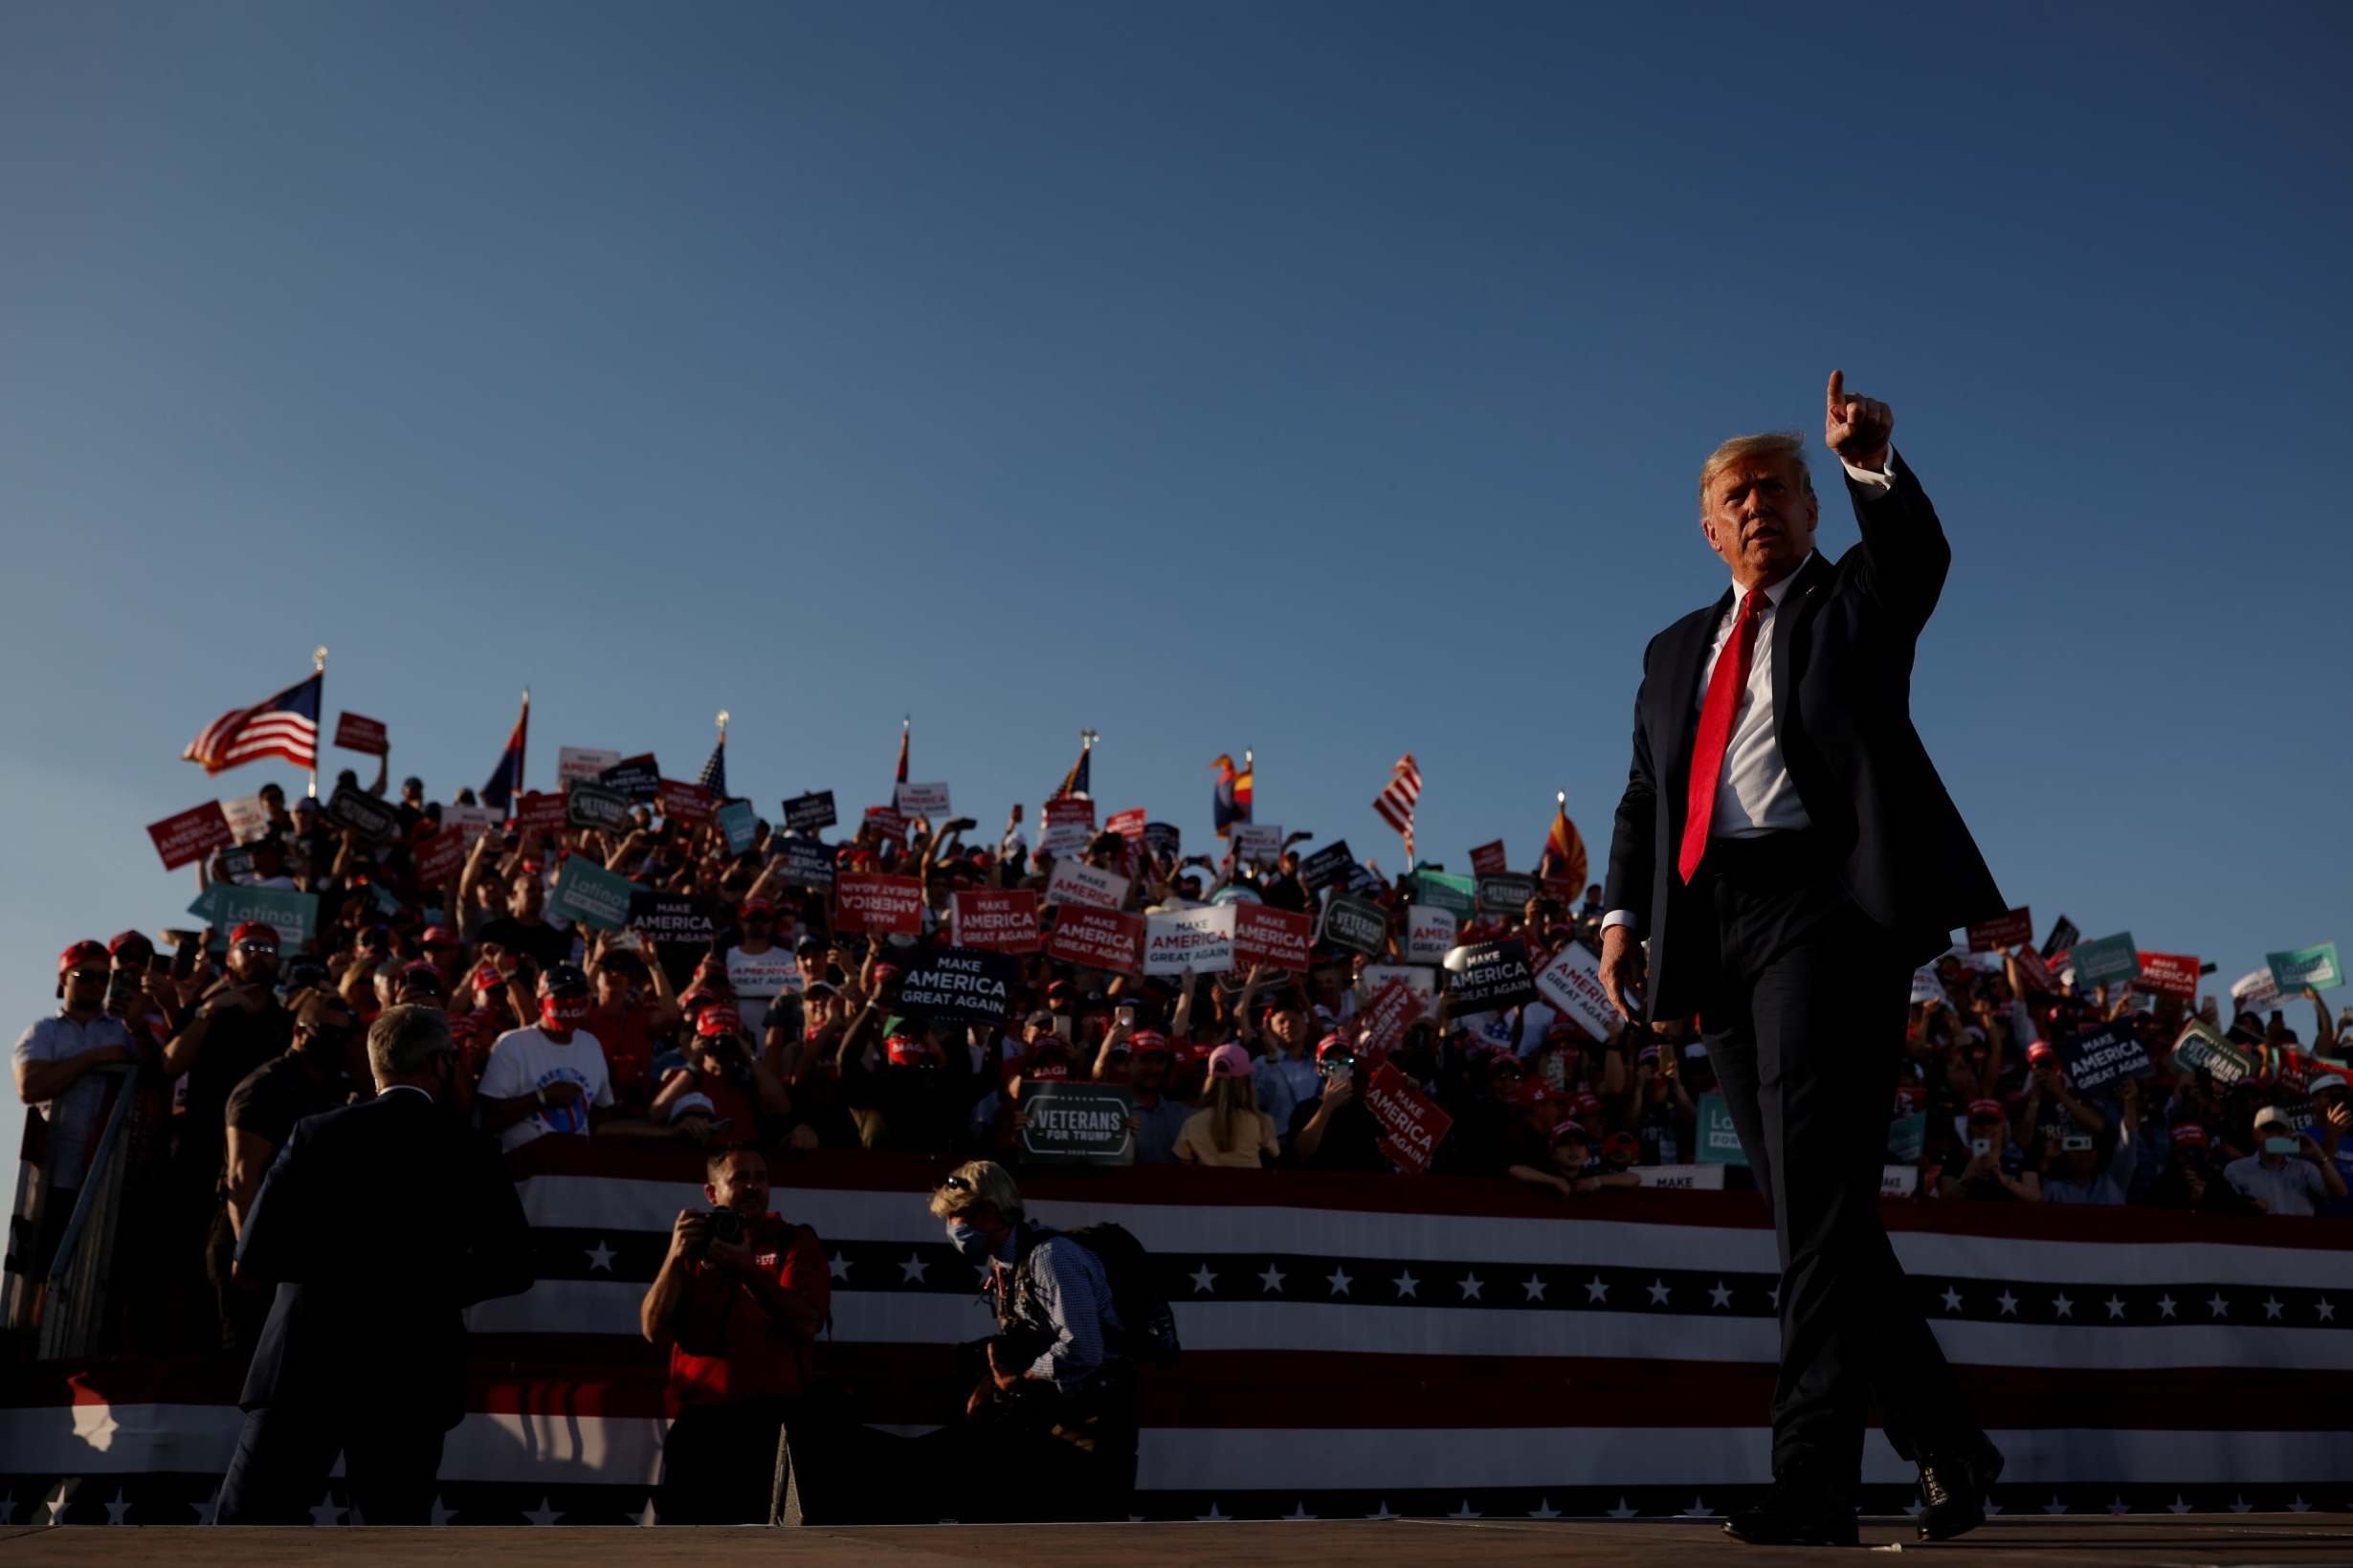 Donald Trump at a campaign rally in Tucson, Arizona, before his election defeat last year.